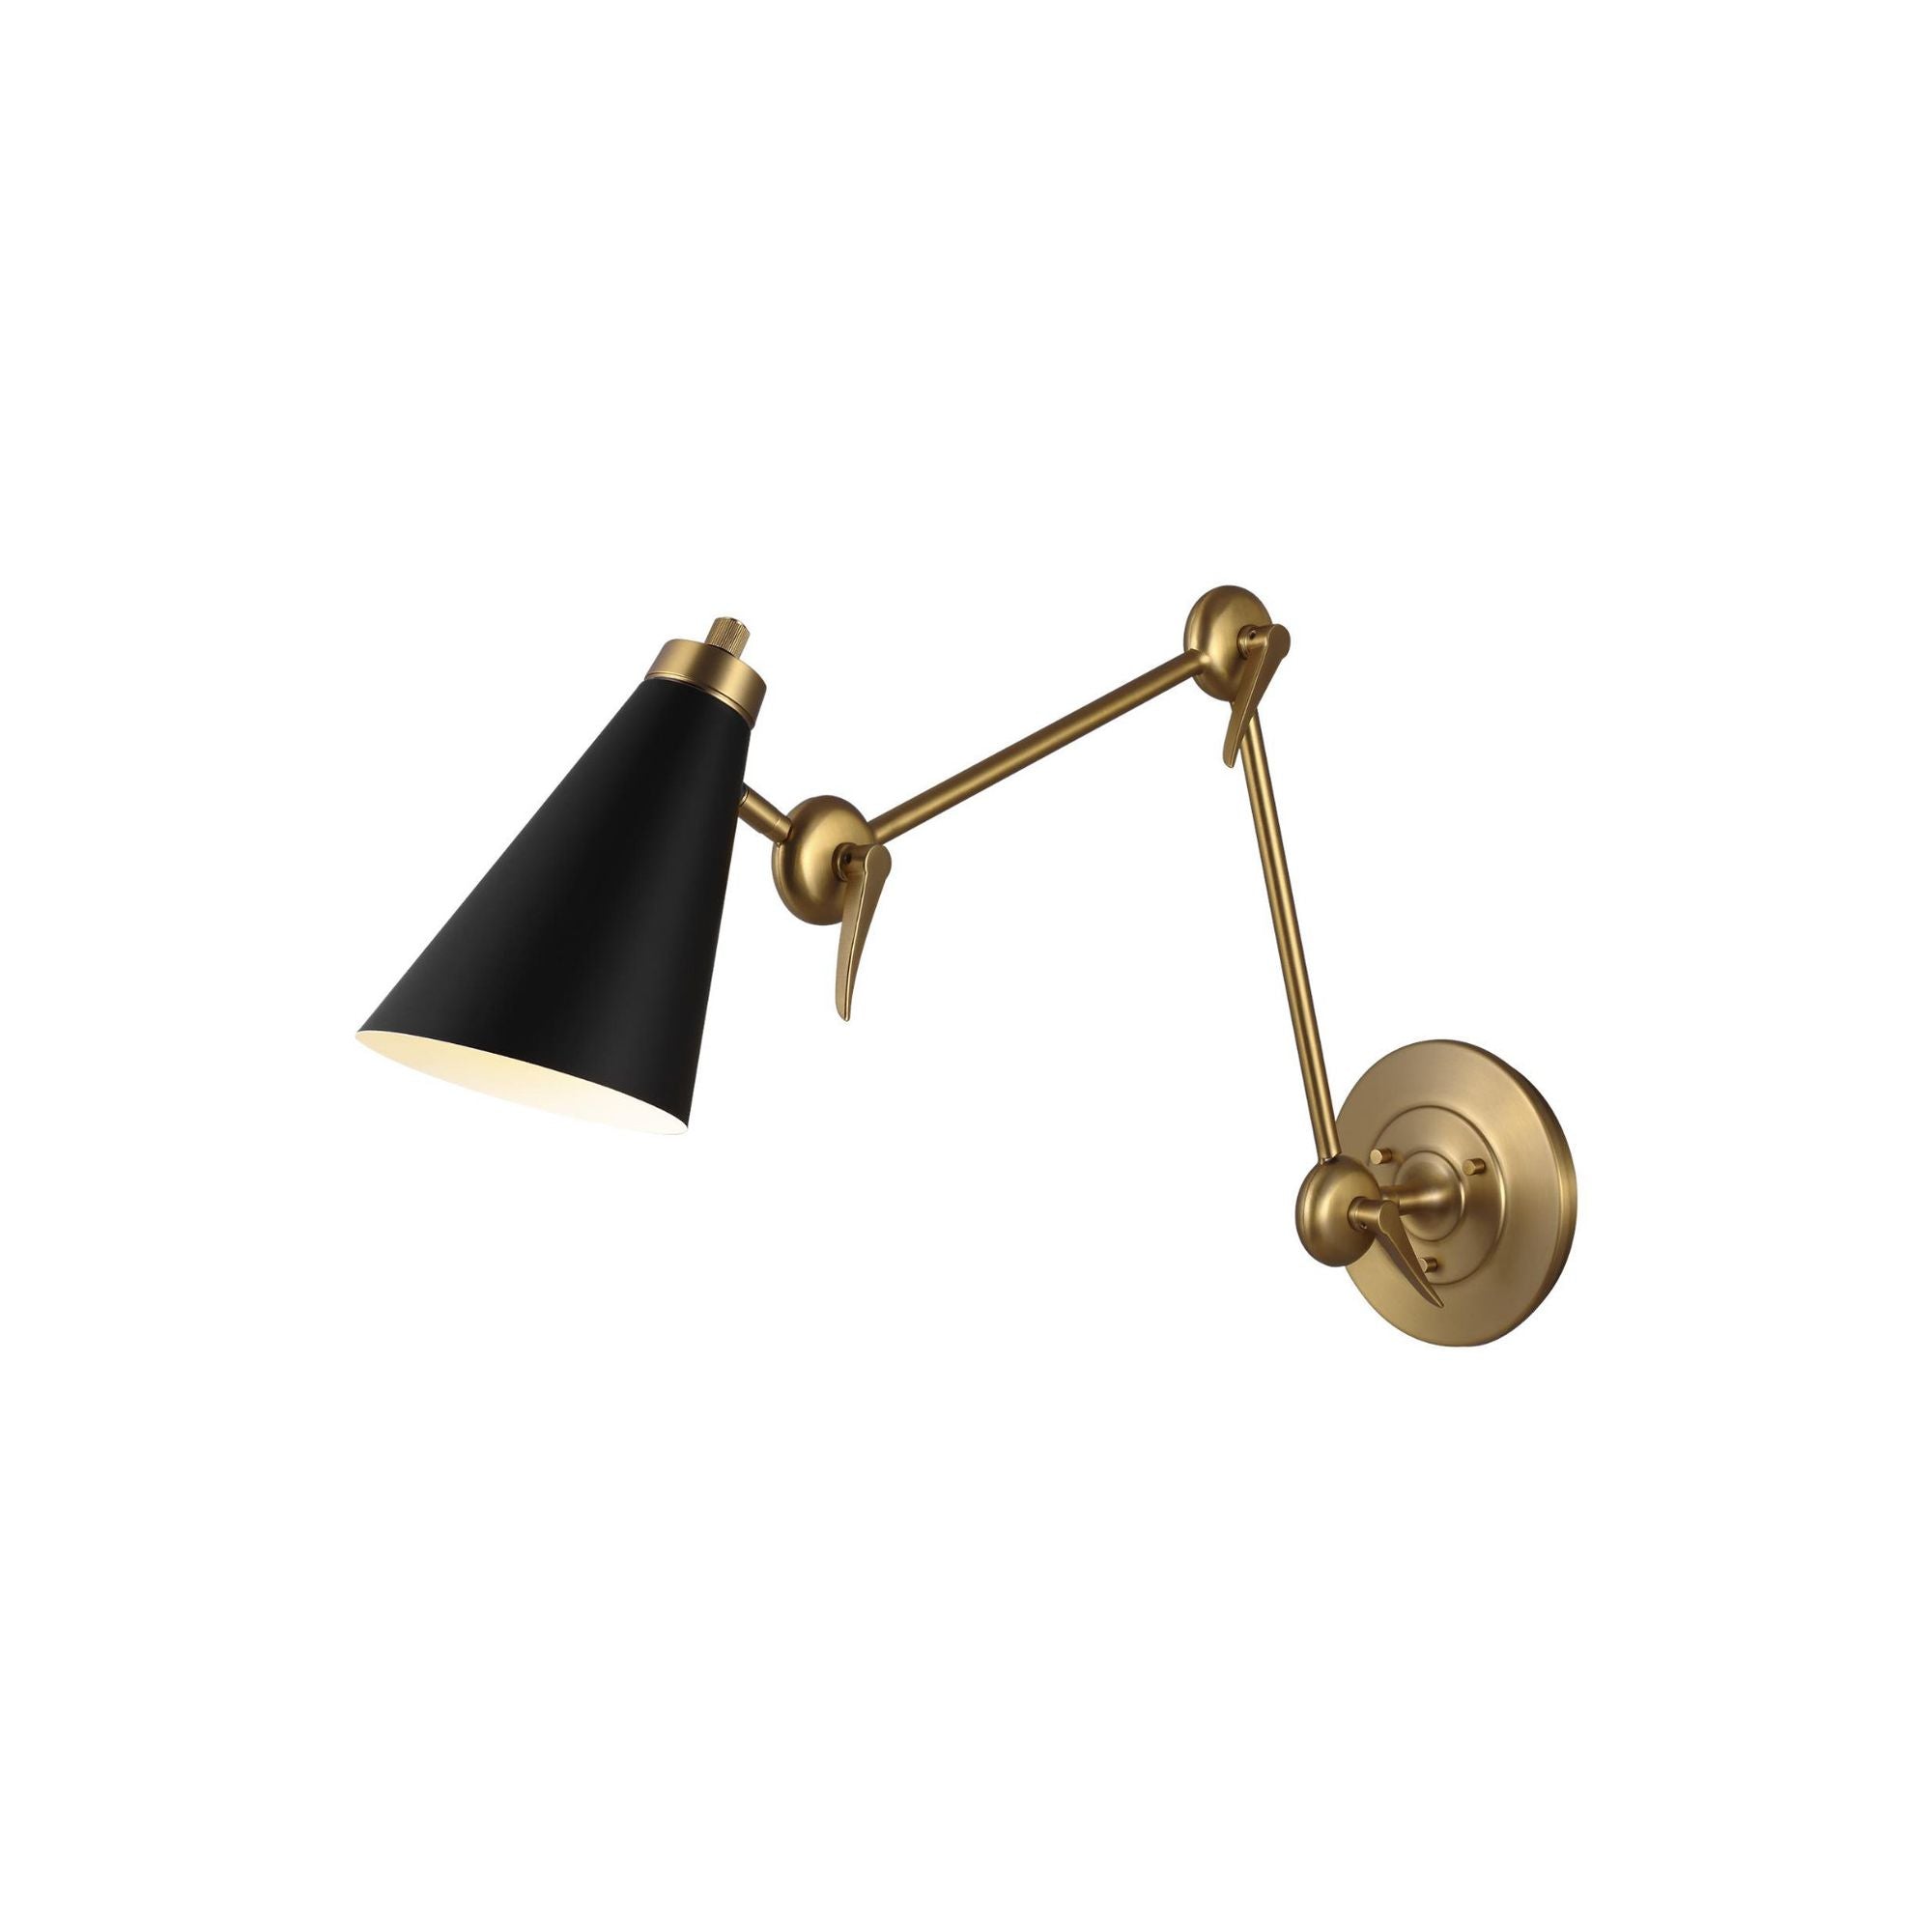 Thomas O'Brien Signoret 2 - Arm Library Sconce in Burnished Brass